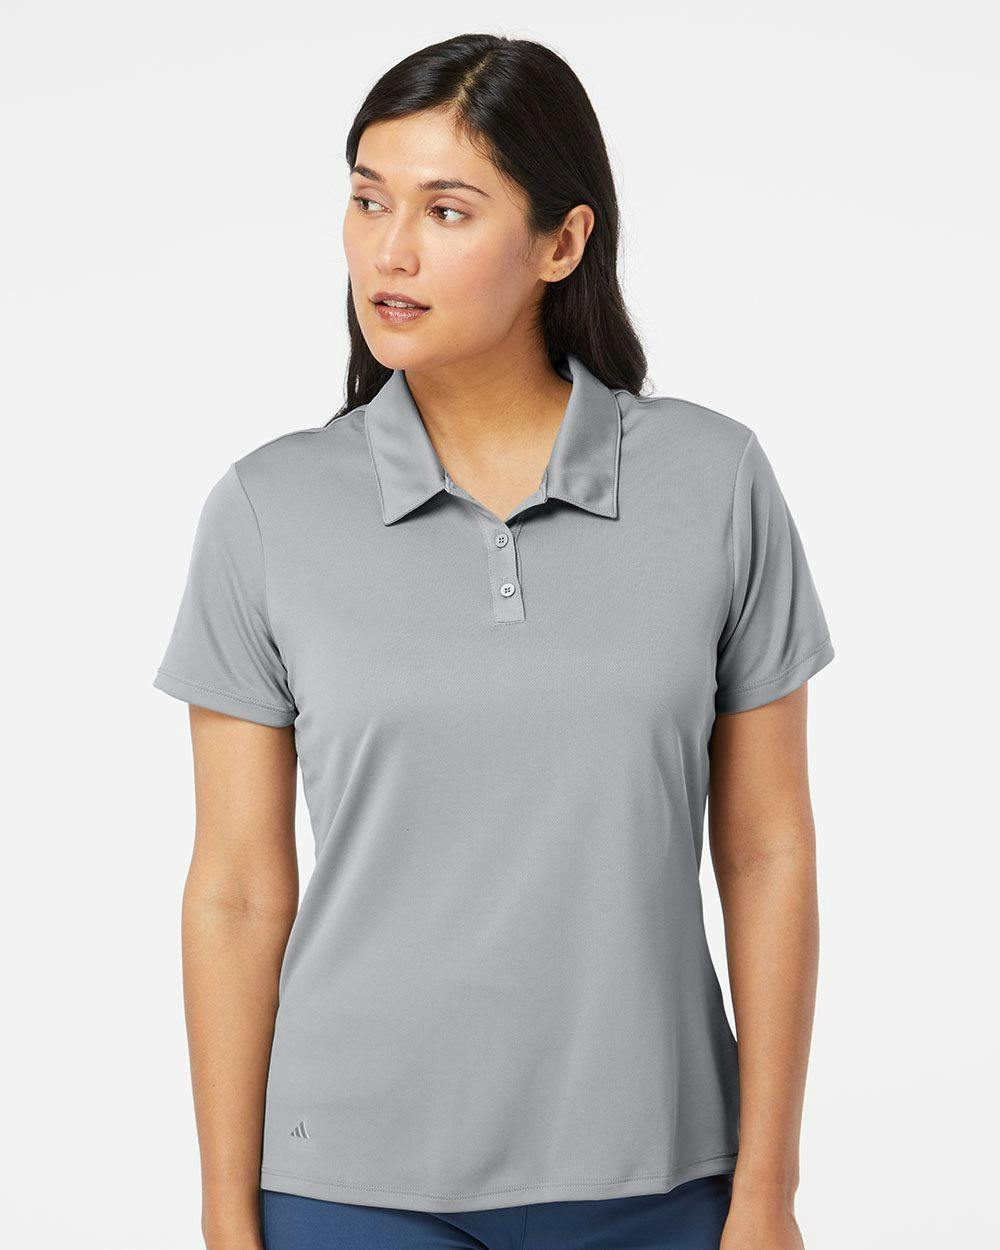 Image for Women's Performance Polo - A231